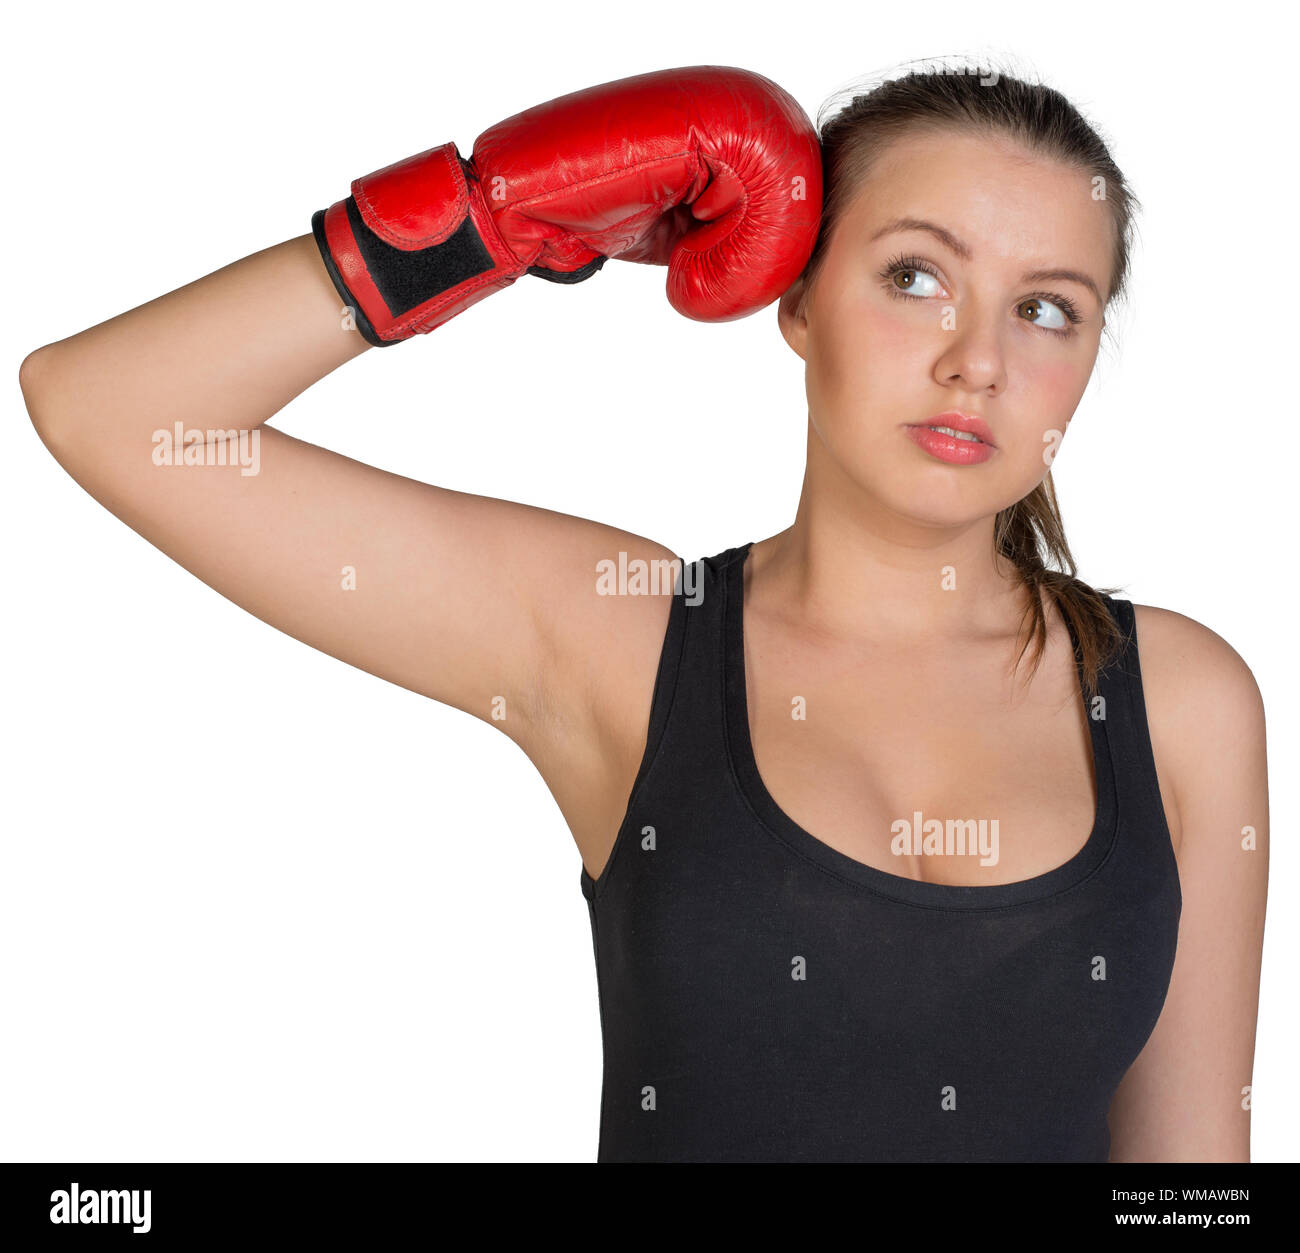 Woman holding boxing glove at her temple, looking to her right. Isolated on white background Stock Photo